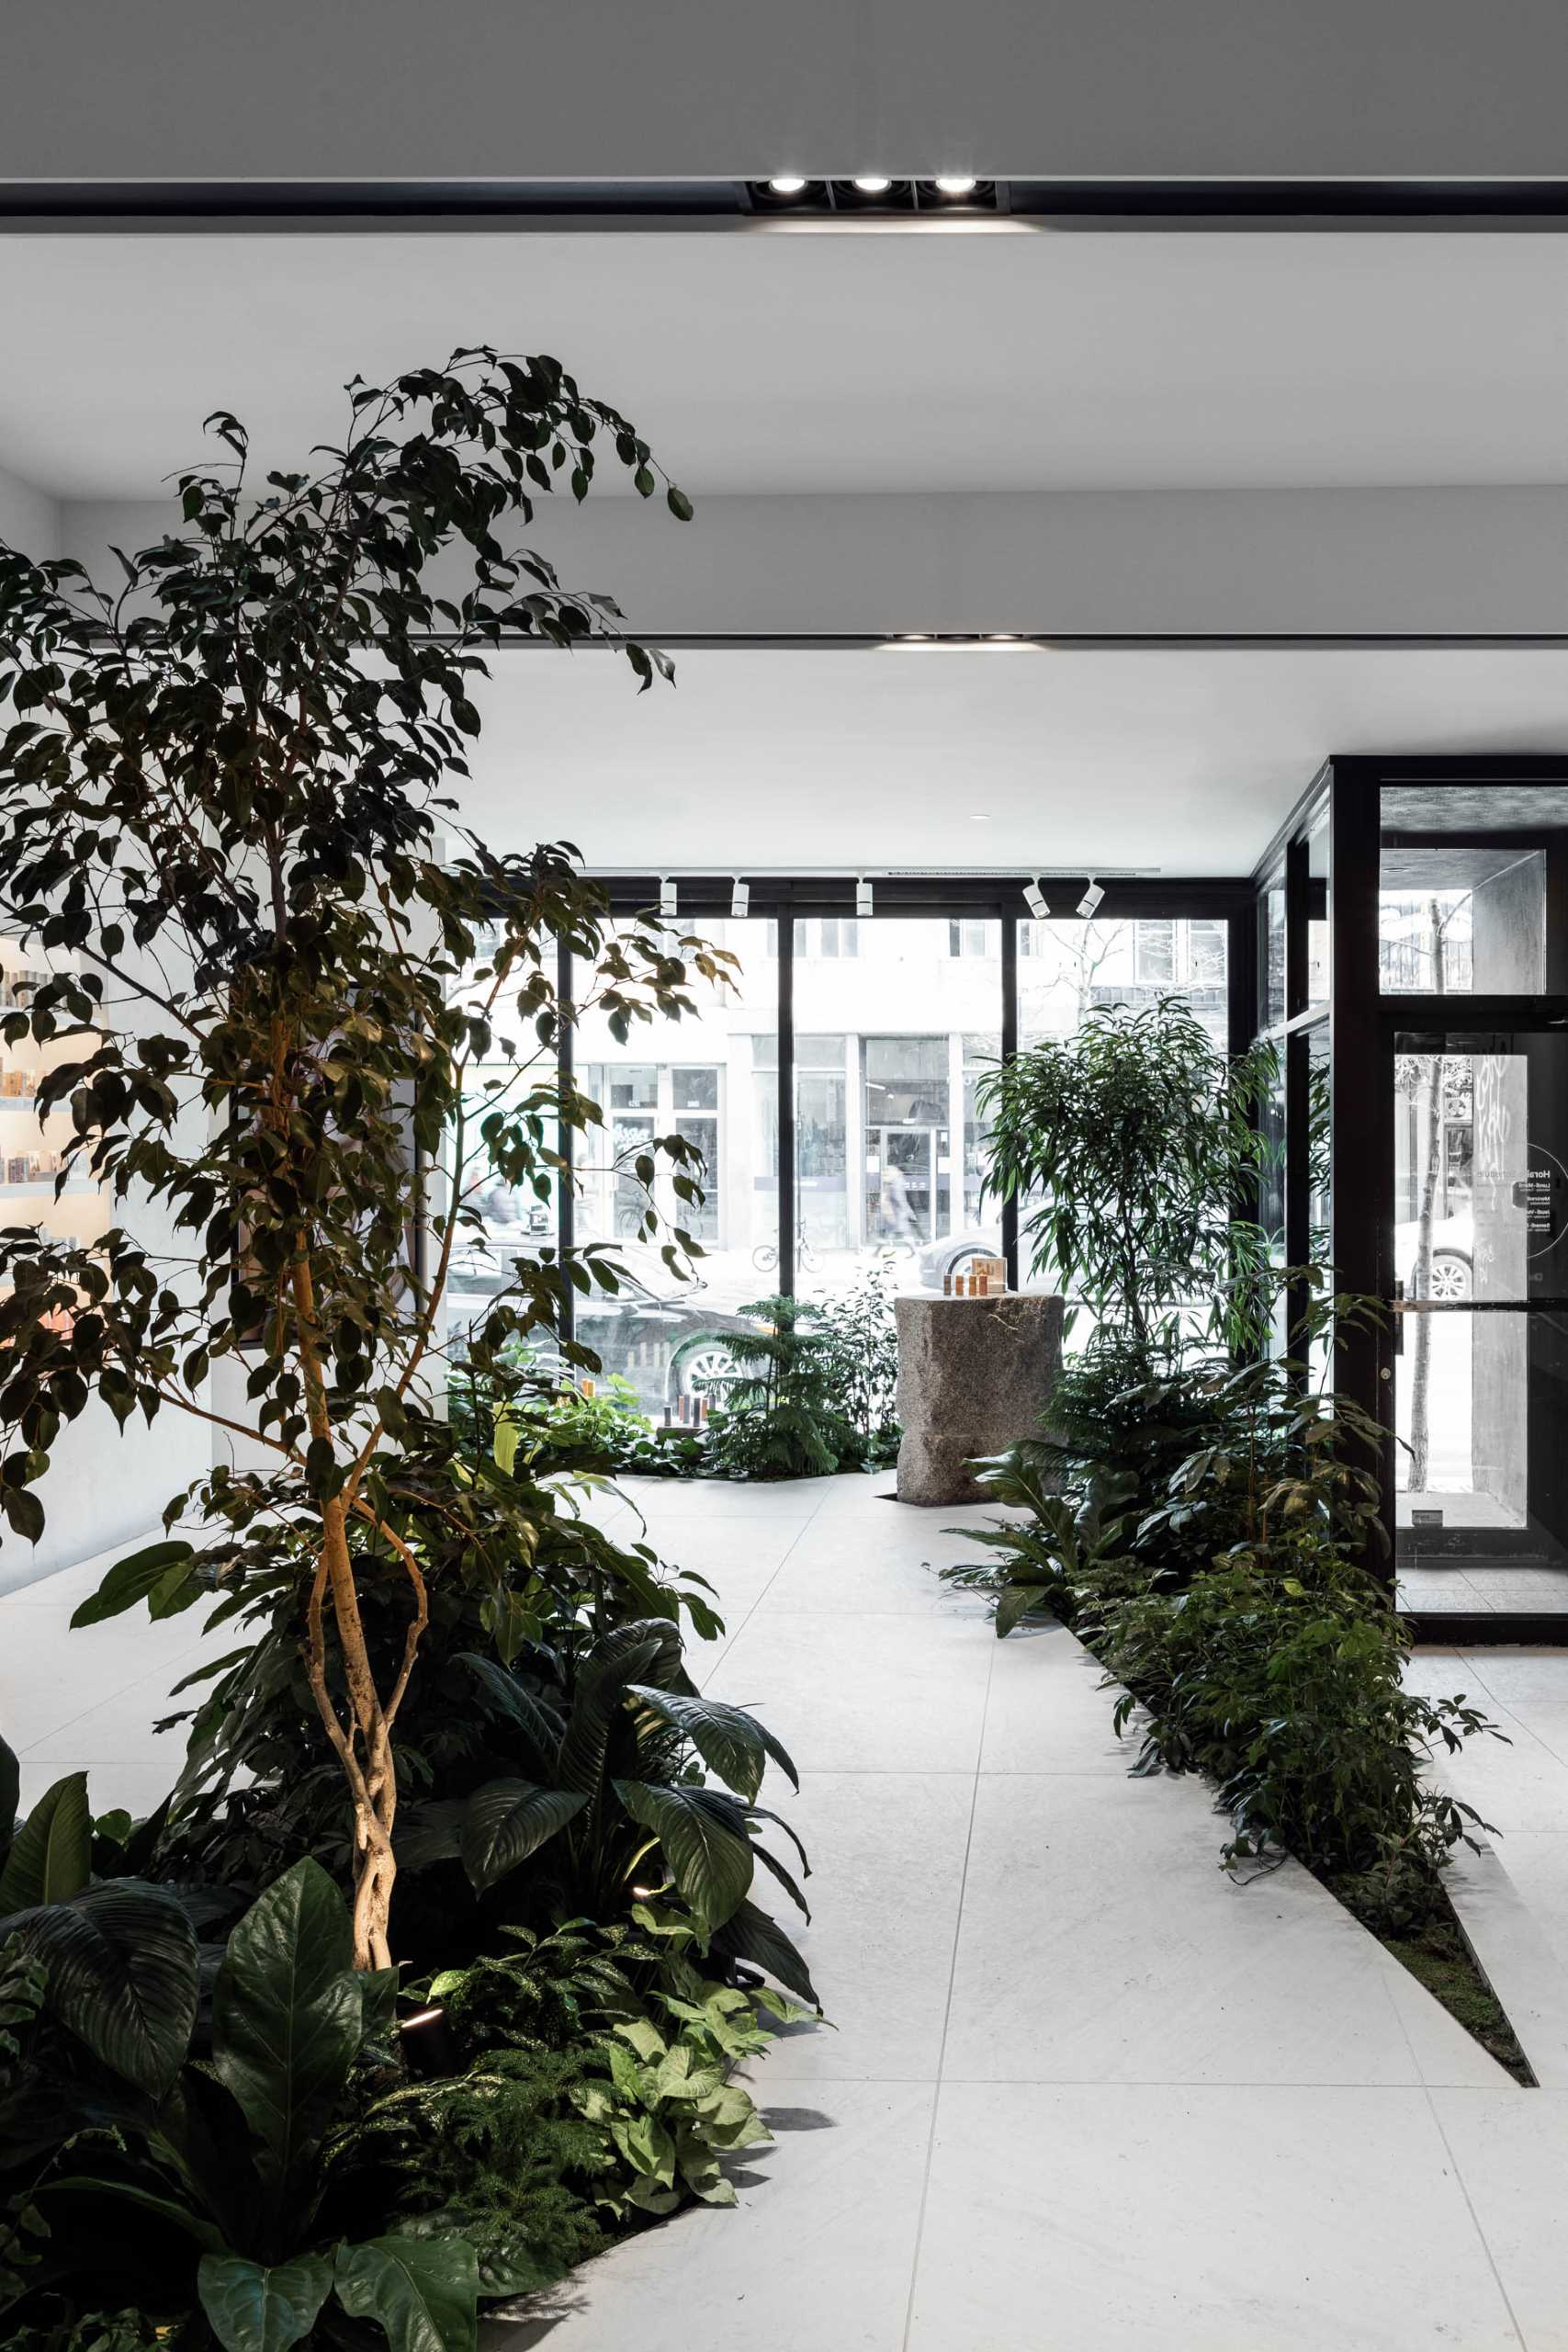 A modern retail store with built-in planters and stone accents throughout.